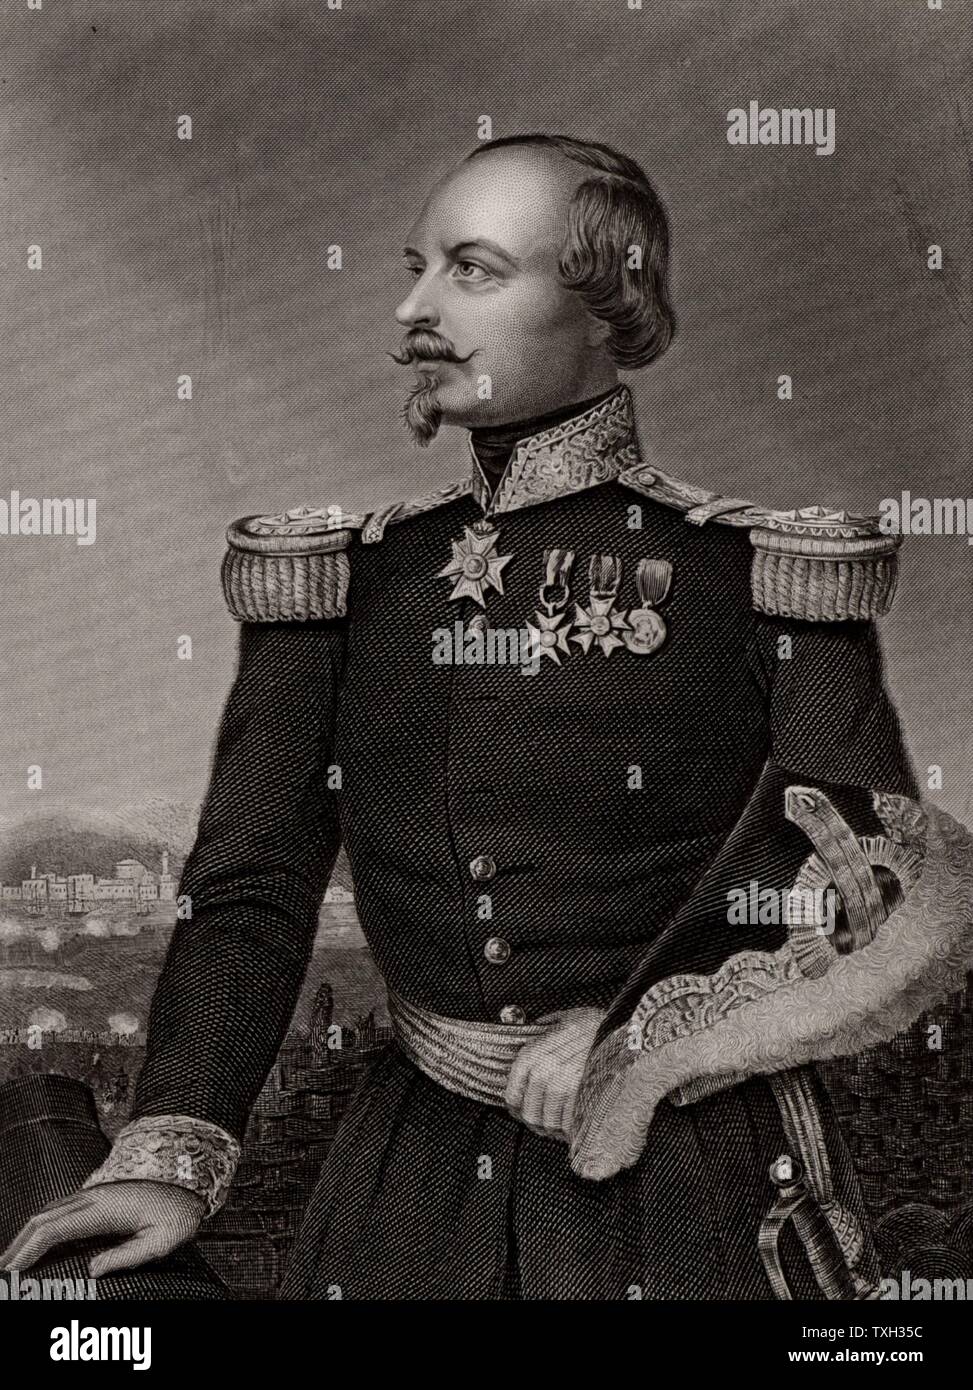 François Certain de Canrobert (1809-1895) French soldier and Marshal of France. During the Crimean (Russo-Turkish) War (1853-1856)  he was twice wounded at the Battle of Alma. On the death of St Arnaud (1854) he assumed command of French forces and was again wounded at Inkerman leading a charge of Zouaves.  Engraving. Stock Photo